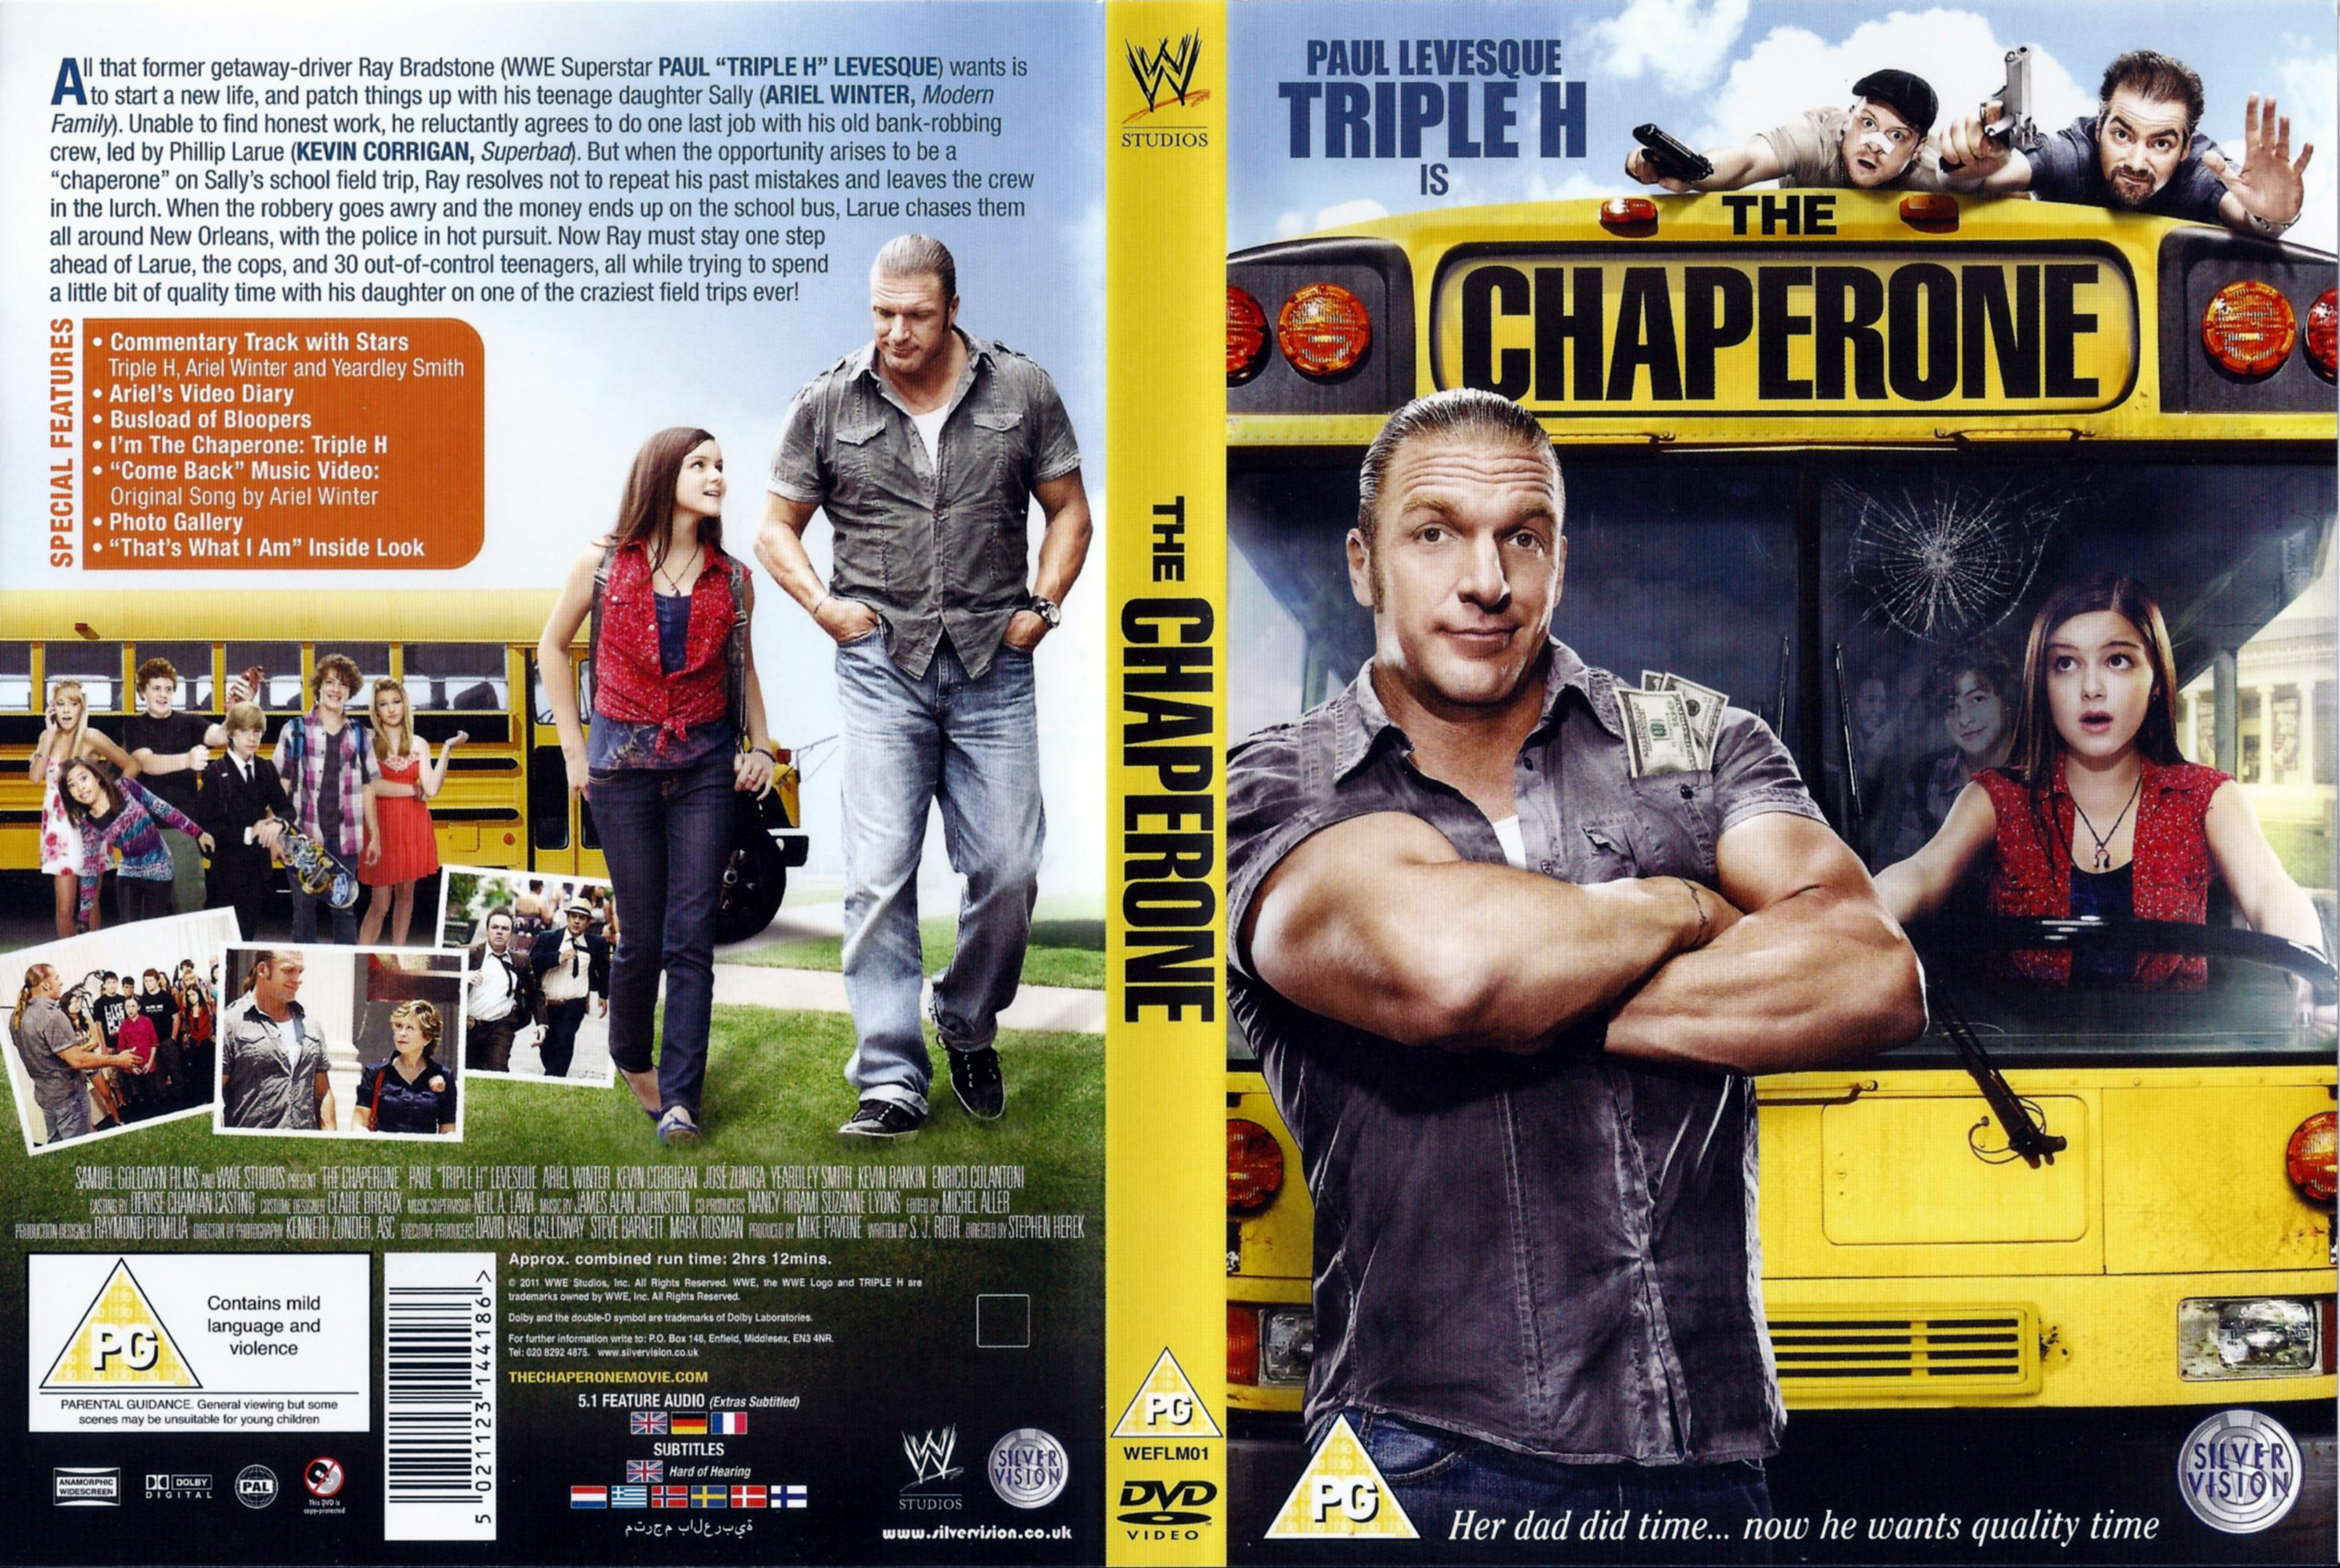 Jaquette DVD The chaperone (UK)